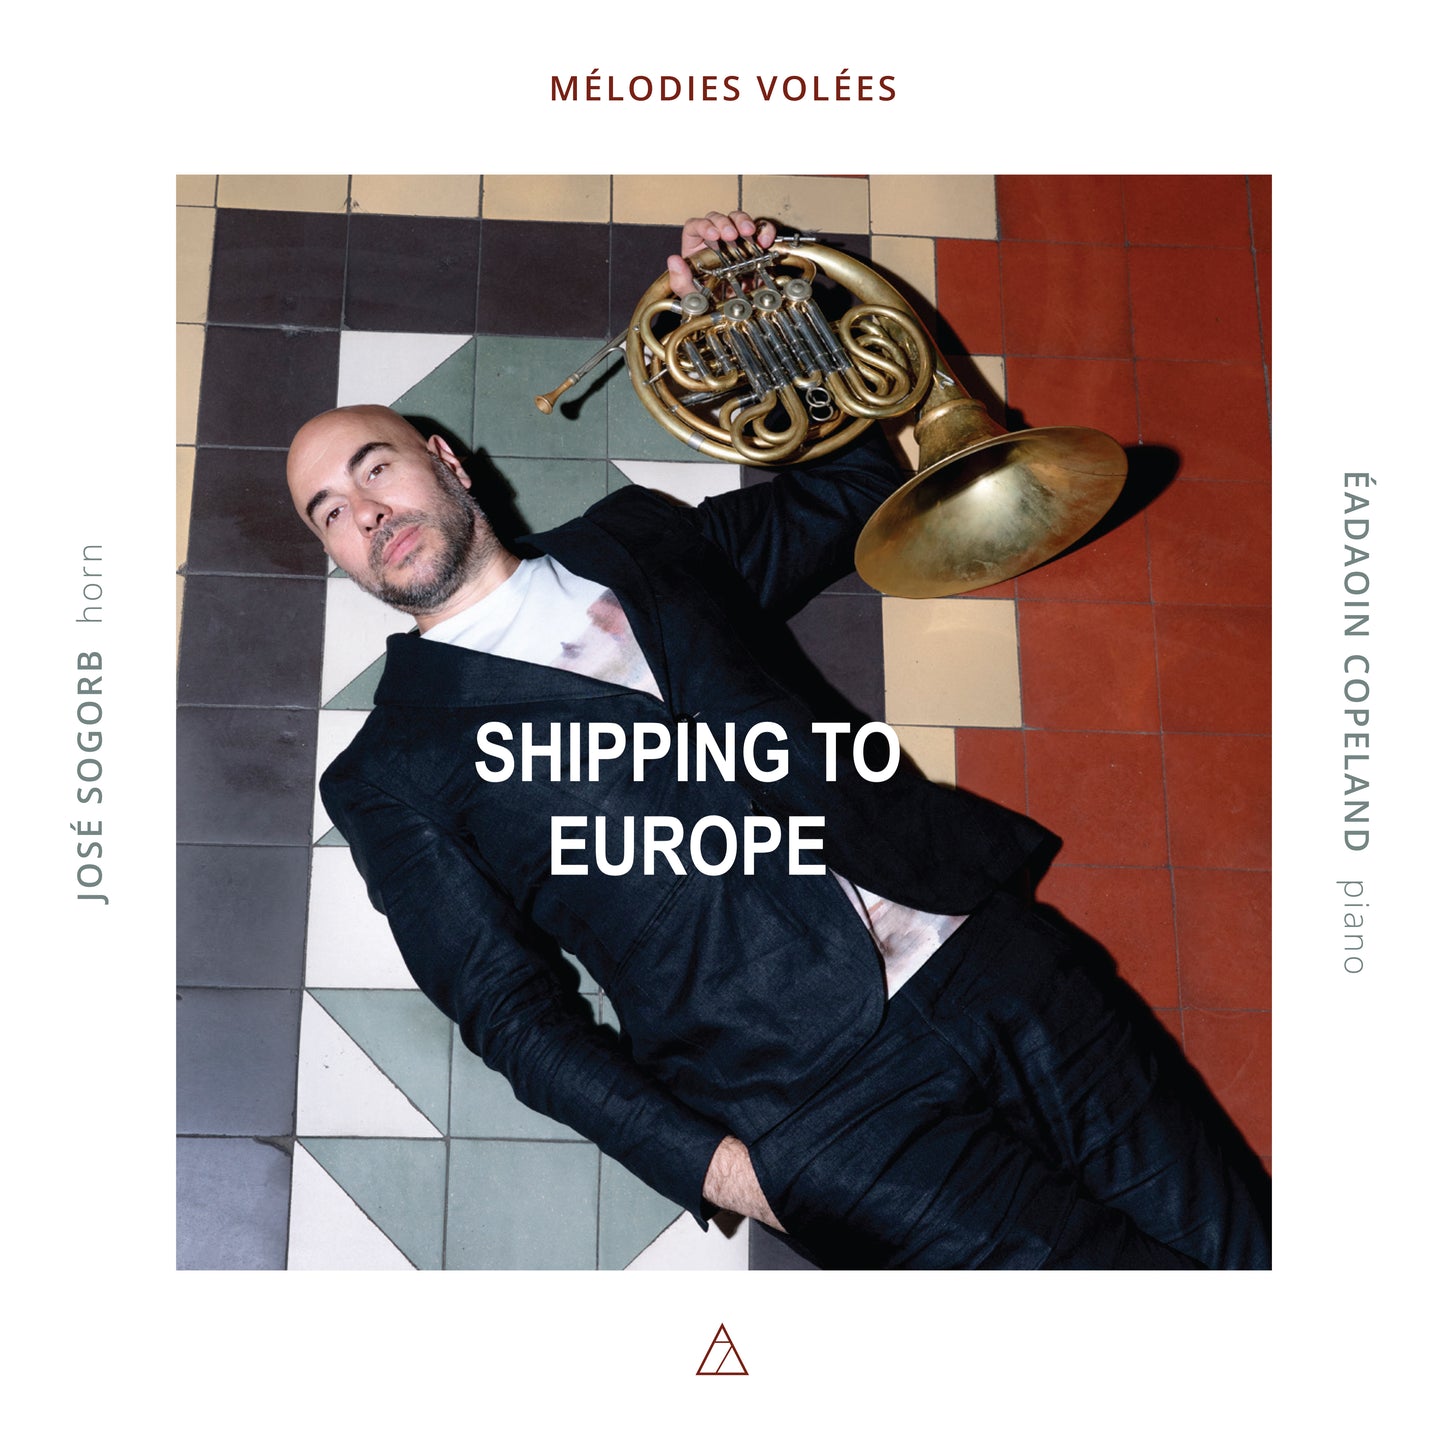 Mélodies Volées Shipping to Europe (not to NL!) (incl. Shipping costs)